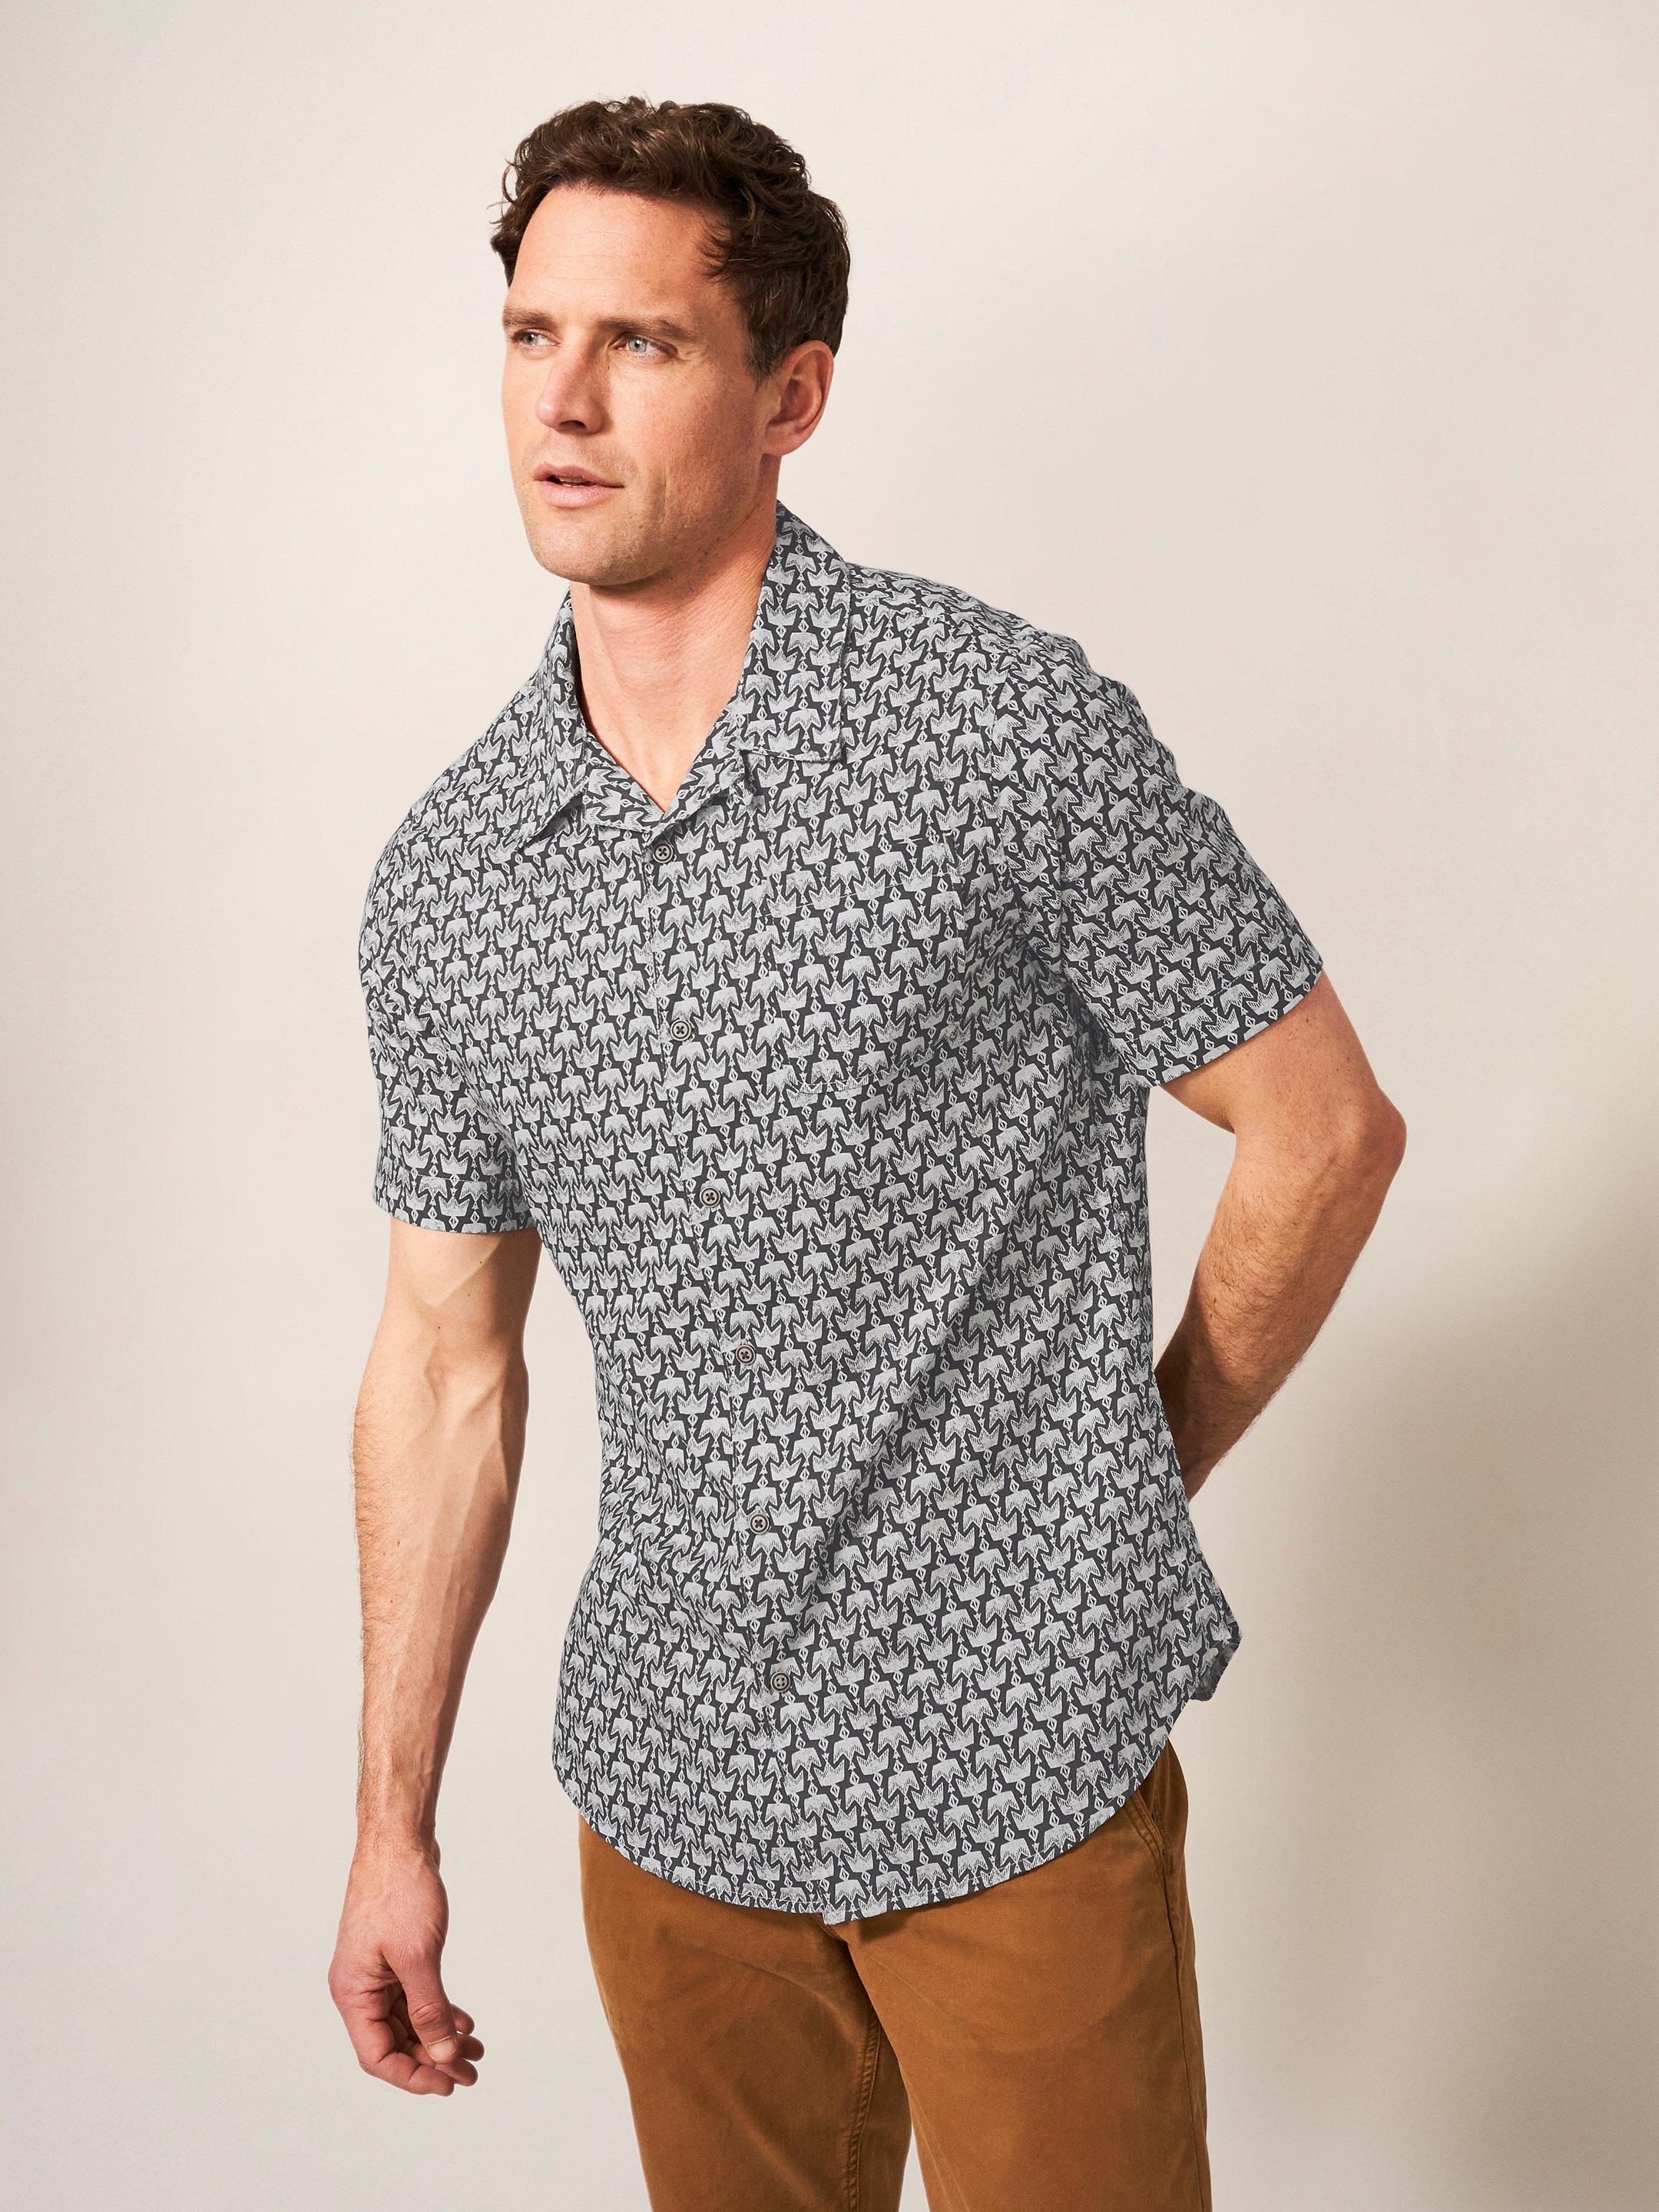 Eagle Printed Slim Fit Shirt in WASHED BLK - LIFESTYLE